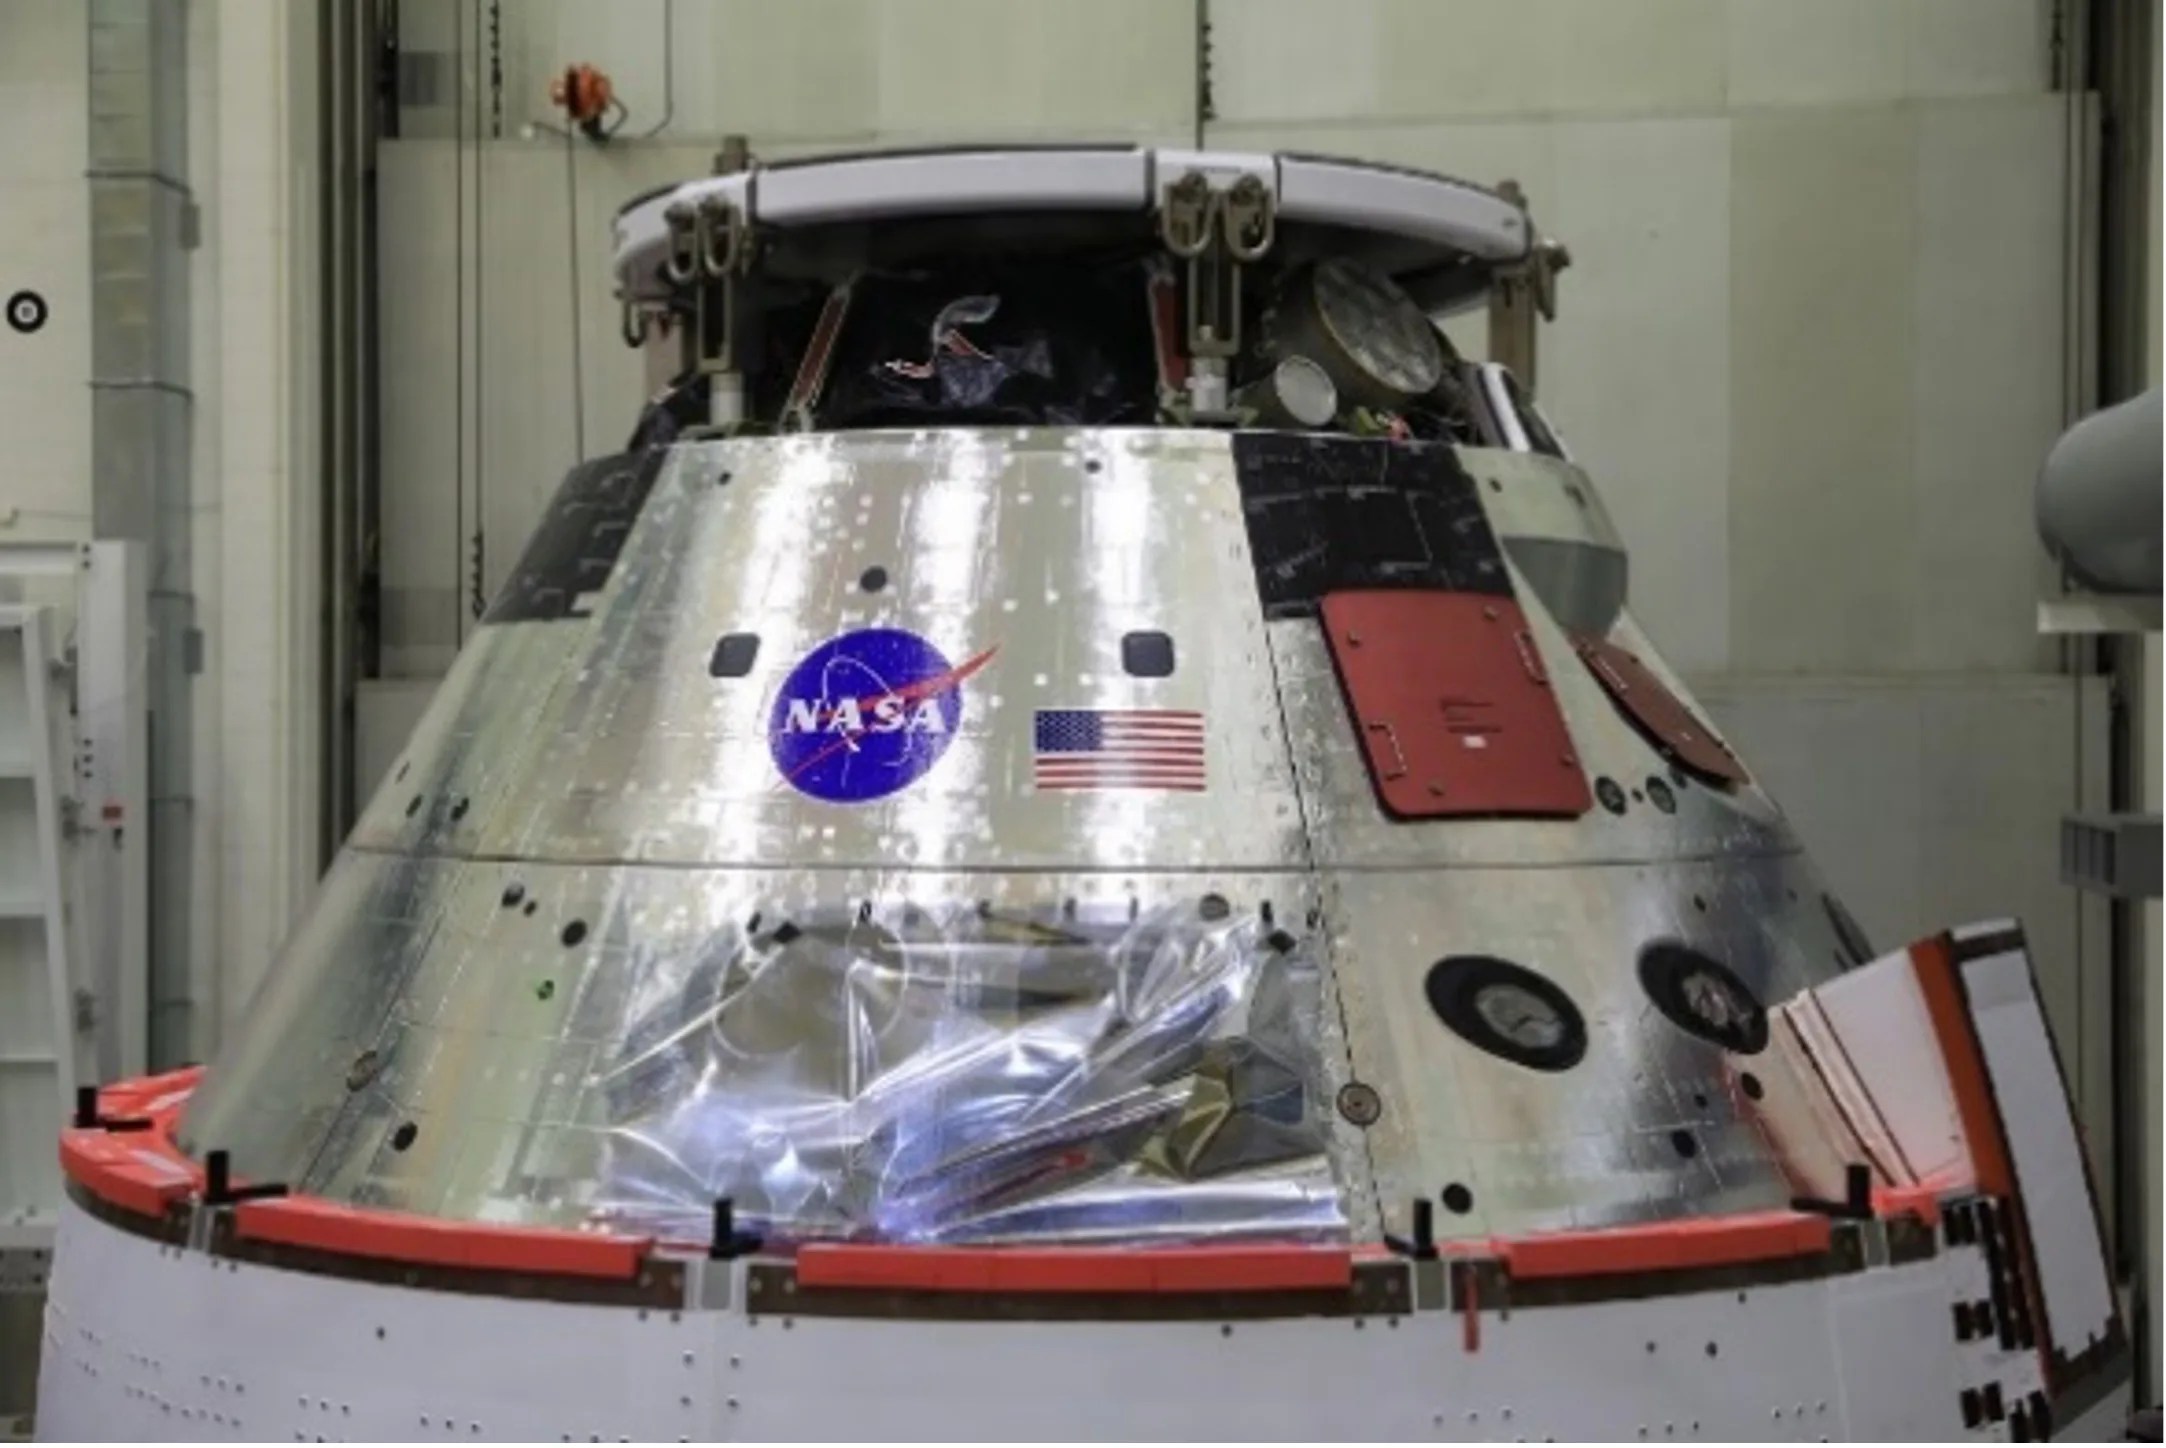 The Orion back shell shines bright with its two rows of silver paneling. The NASA “meatball” insignia and the United States of America flag are affixed to the top row center panel facing the camera. The Orion shell is similar to a three-dimensional cone with the pointed top cut off.